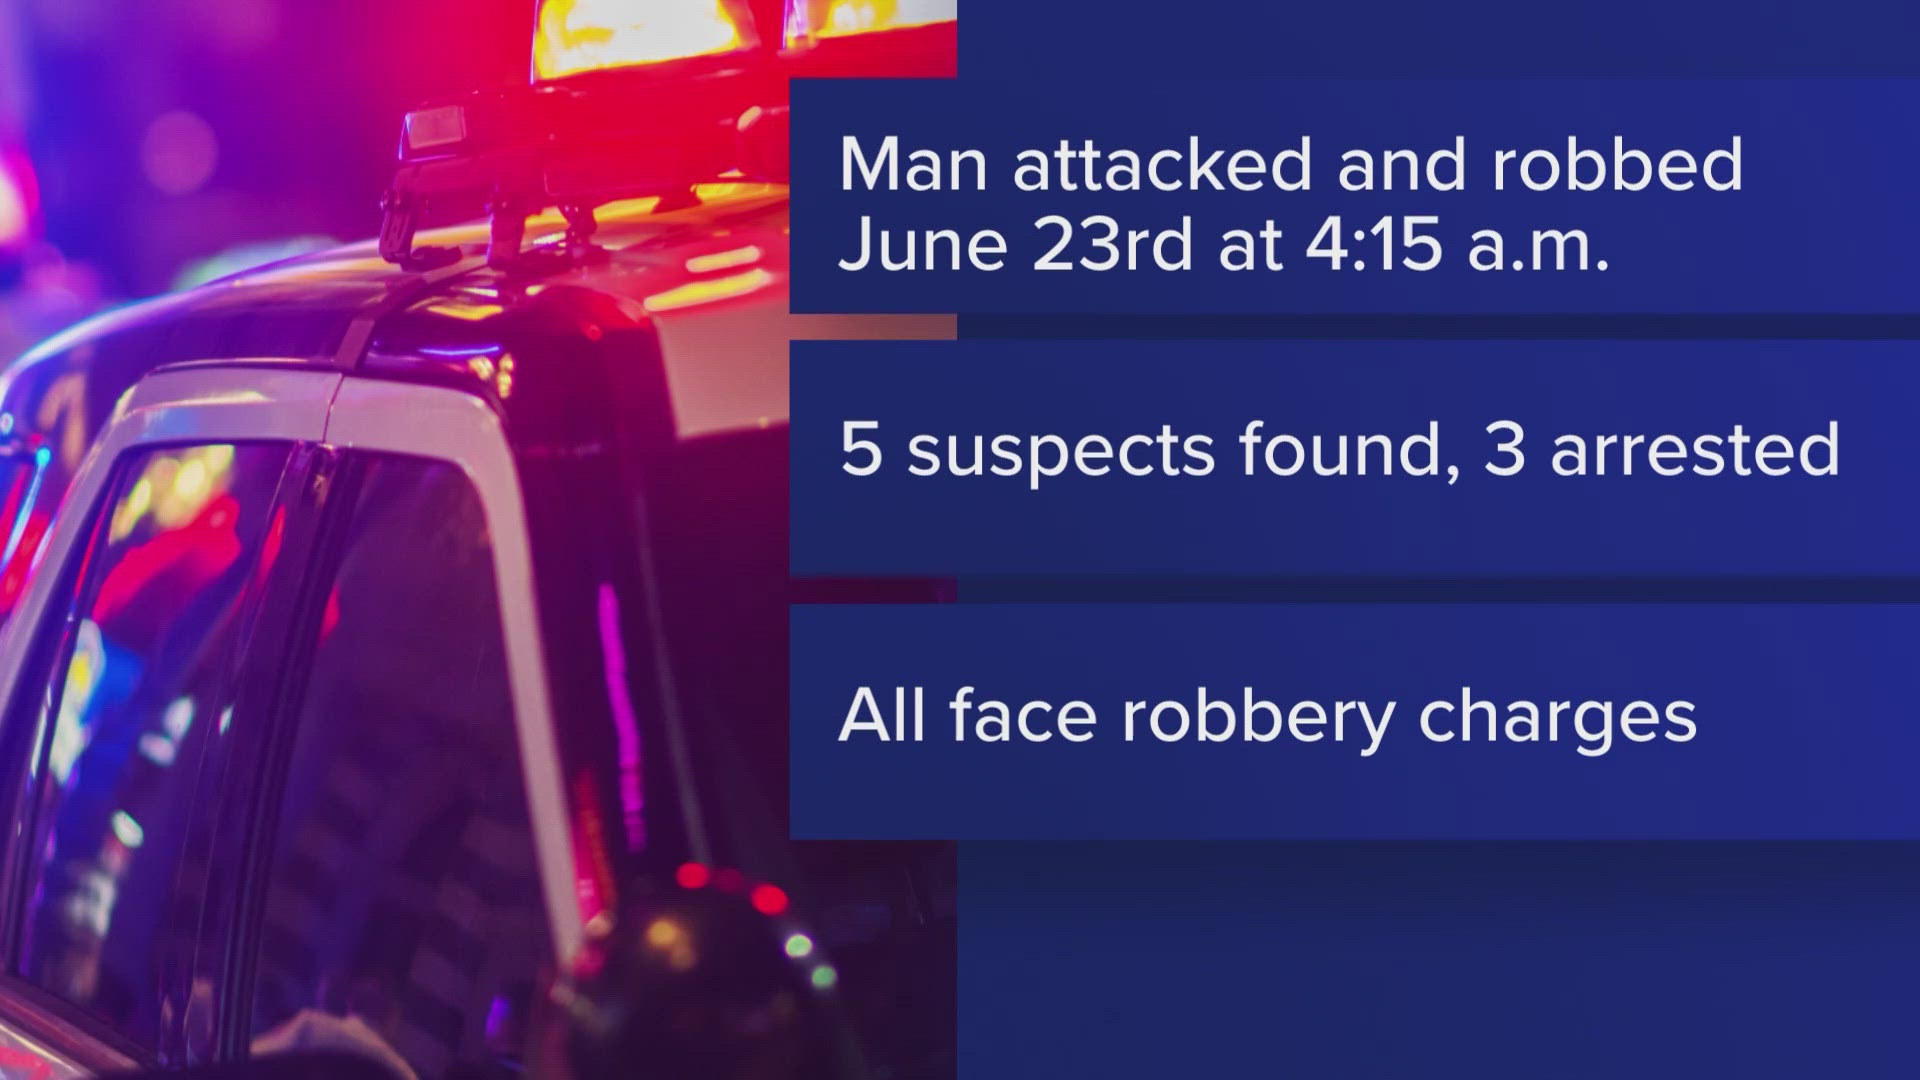 Penobscot County deputies said a man was "viciously attacked and robbed" on June 23 in Hermon. Three suspects have been arrested in connection with the incident.